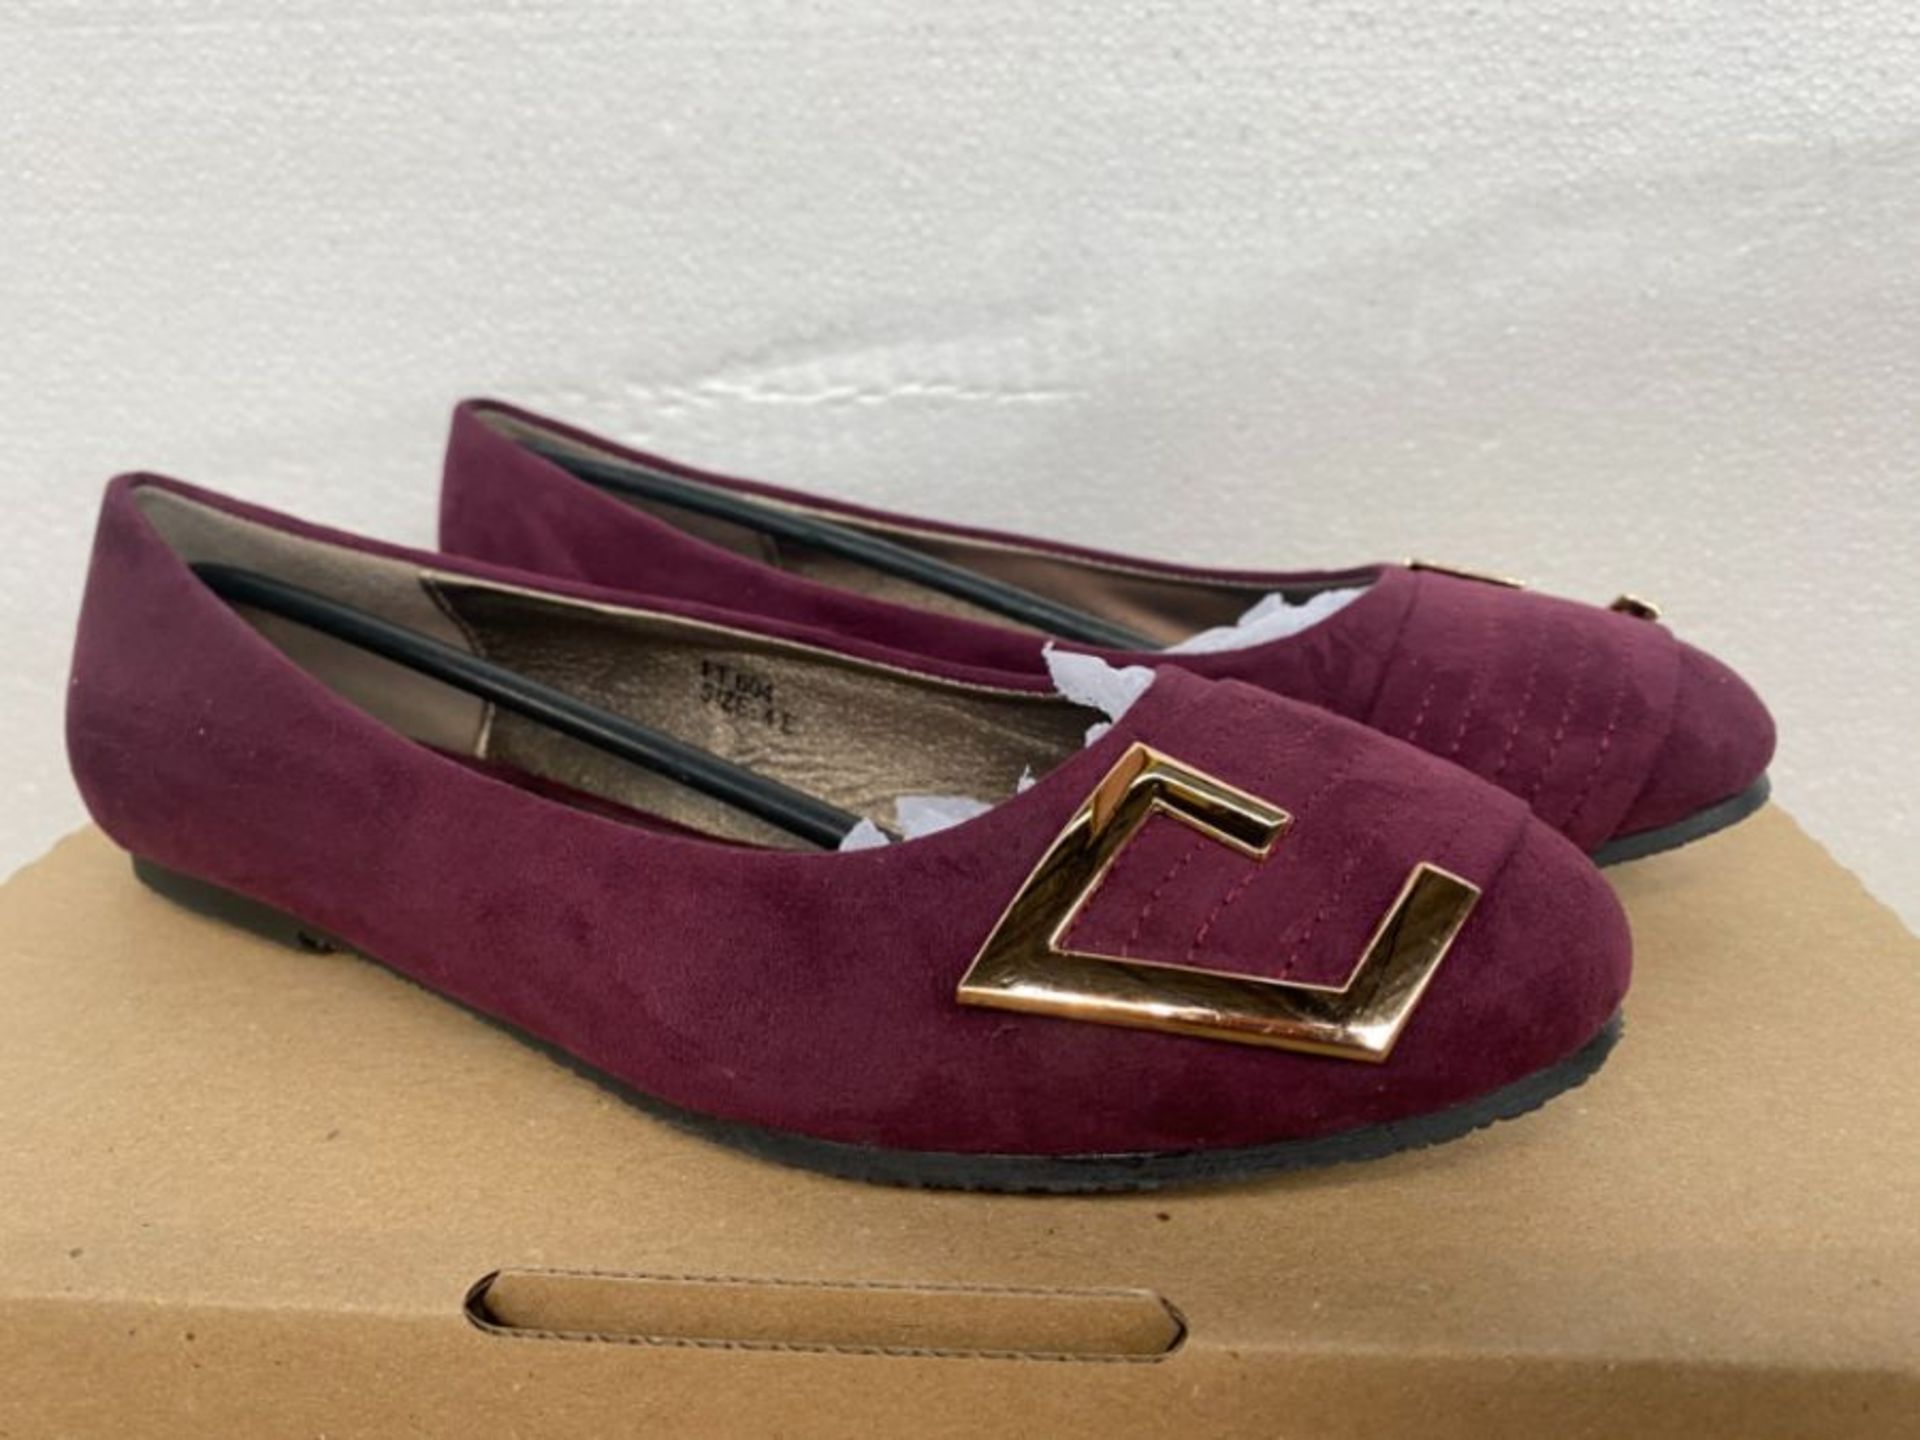 1 LOT TO CONTAIN AN AS NEW BOXED PAIR OF LOWONE UK SIZE 4 BALLERINA SHOE IN WINE (IMAGES ARE FOR